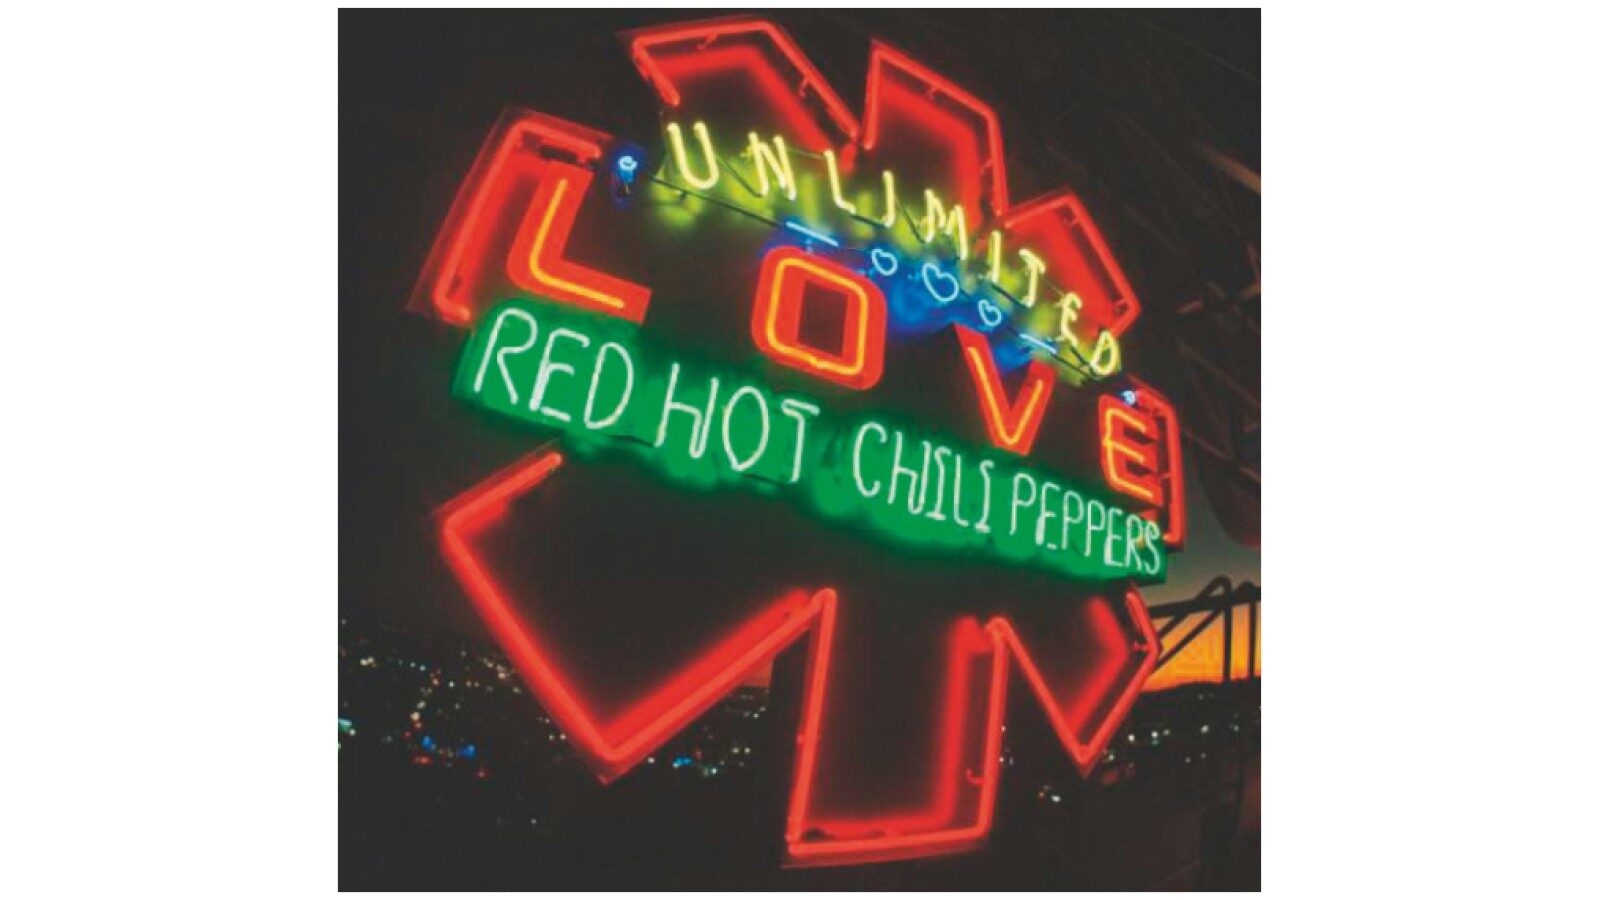 Album des Monats: Red Hot Chili Peppers